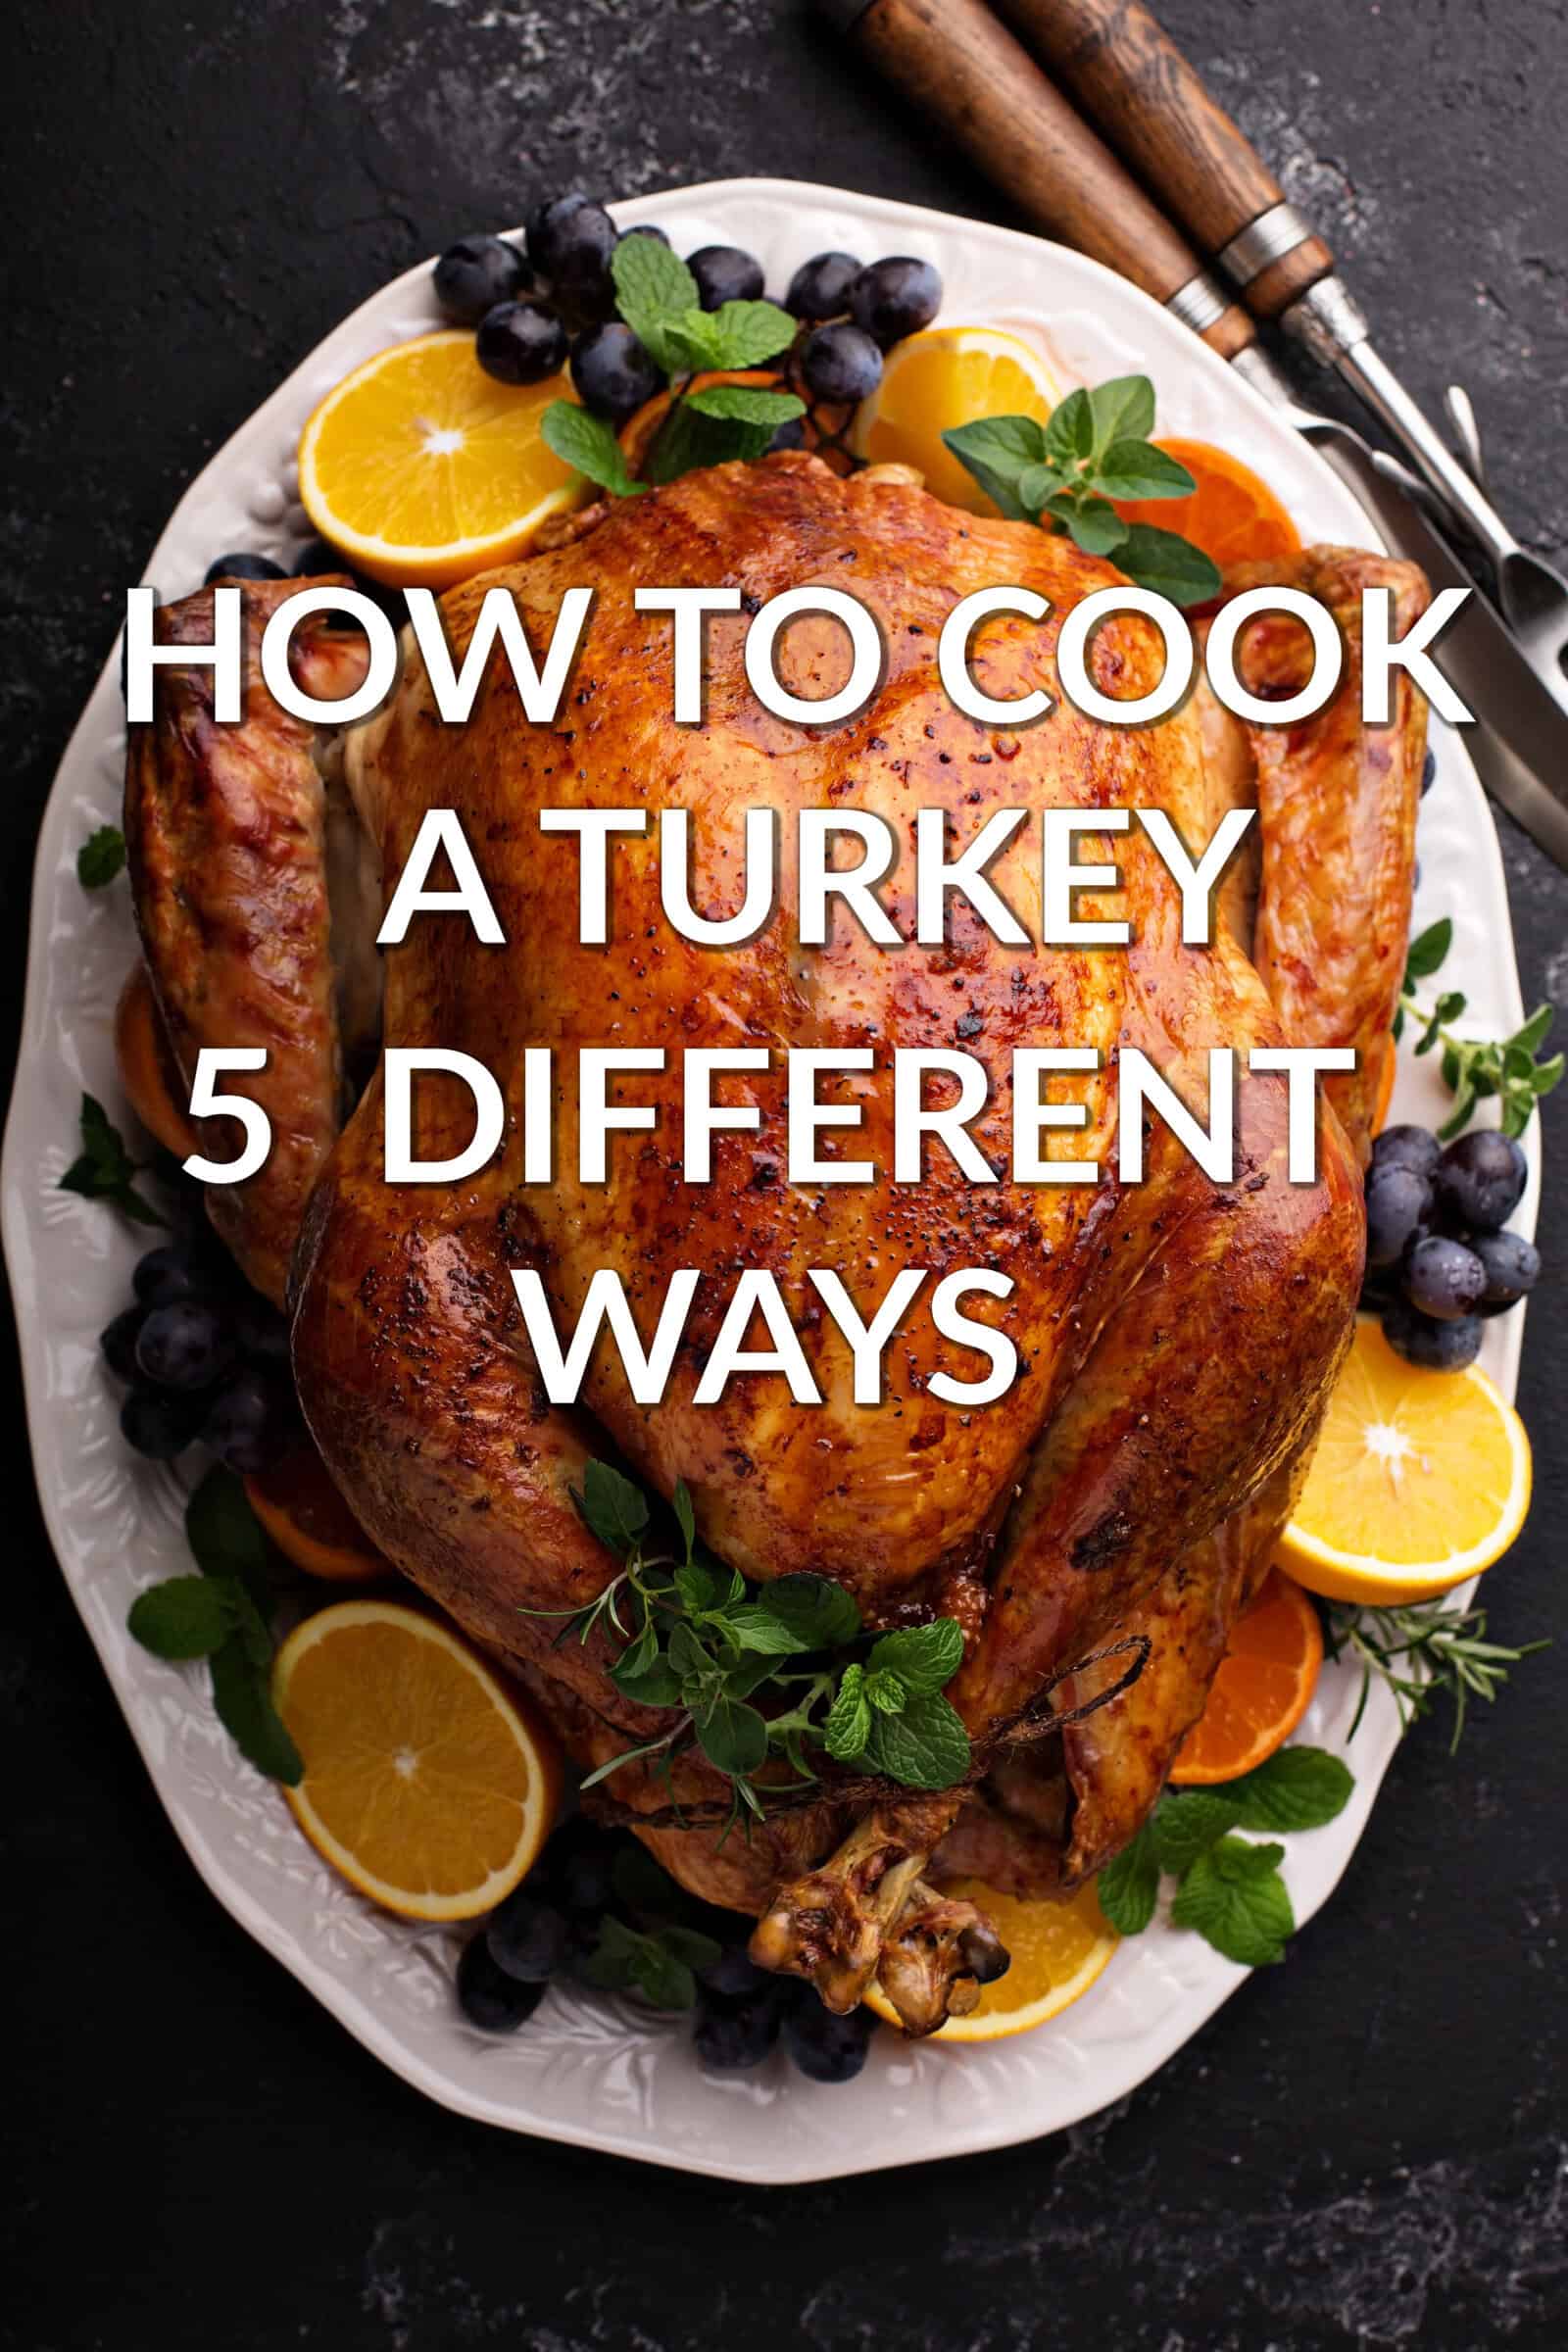 how to draw a cooked turkey step by step